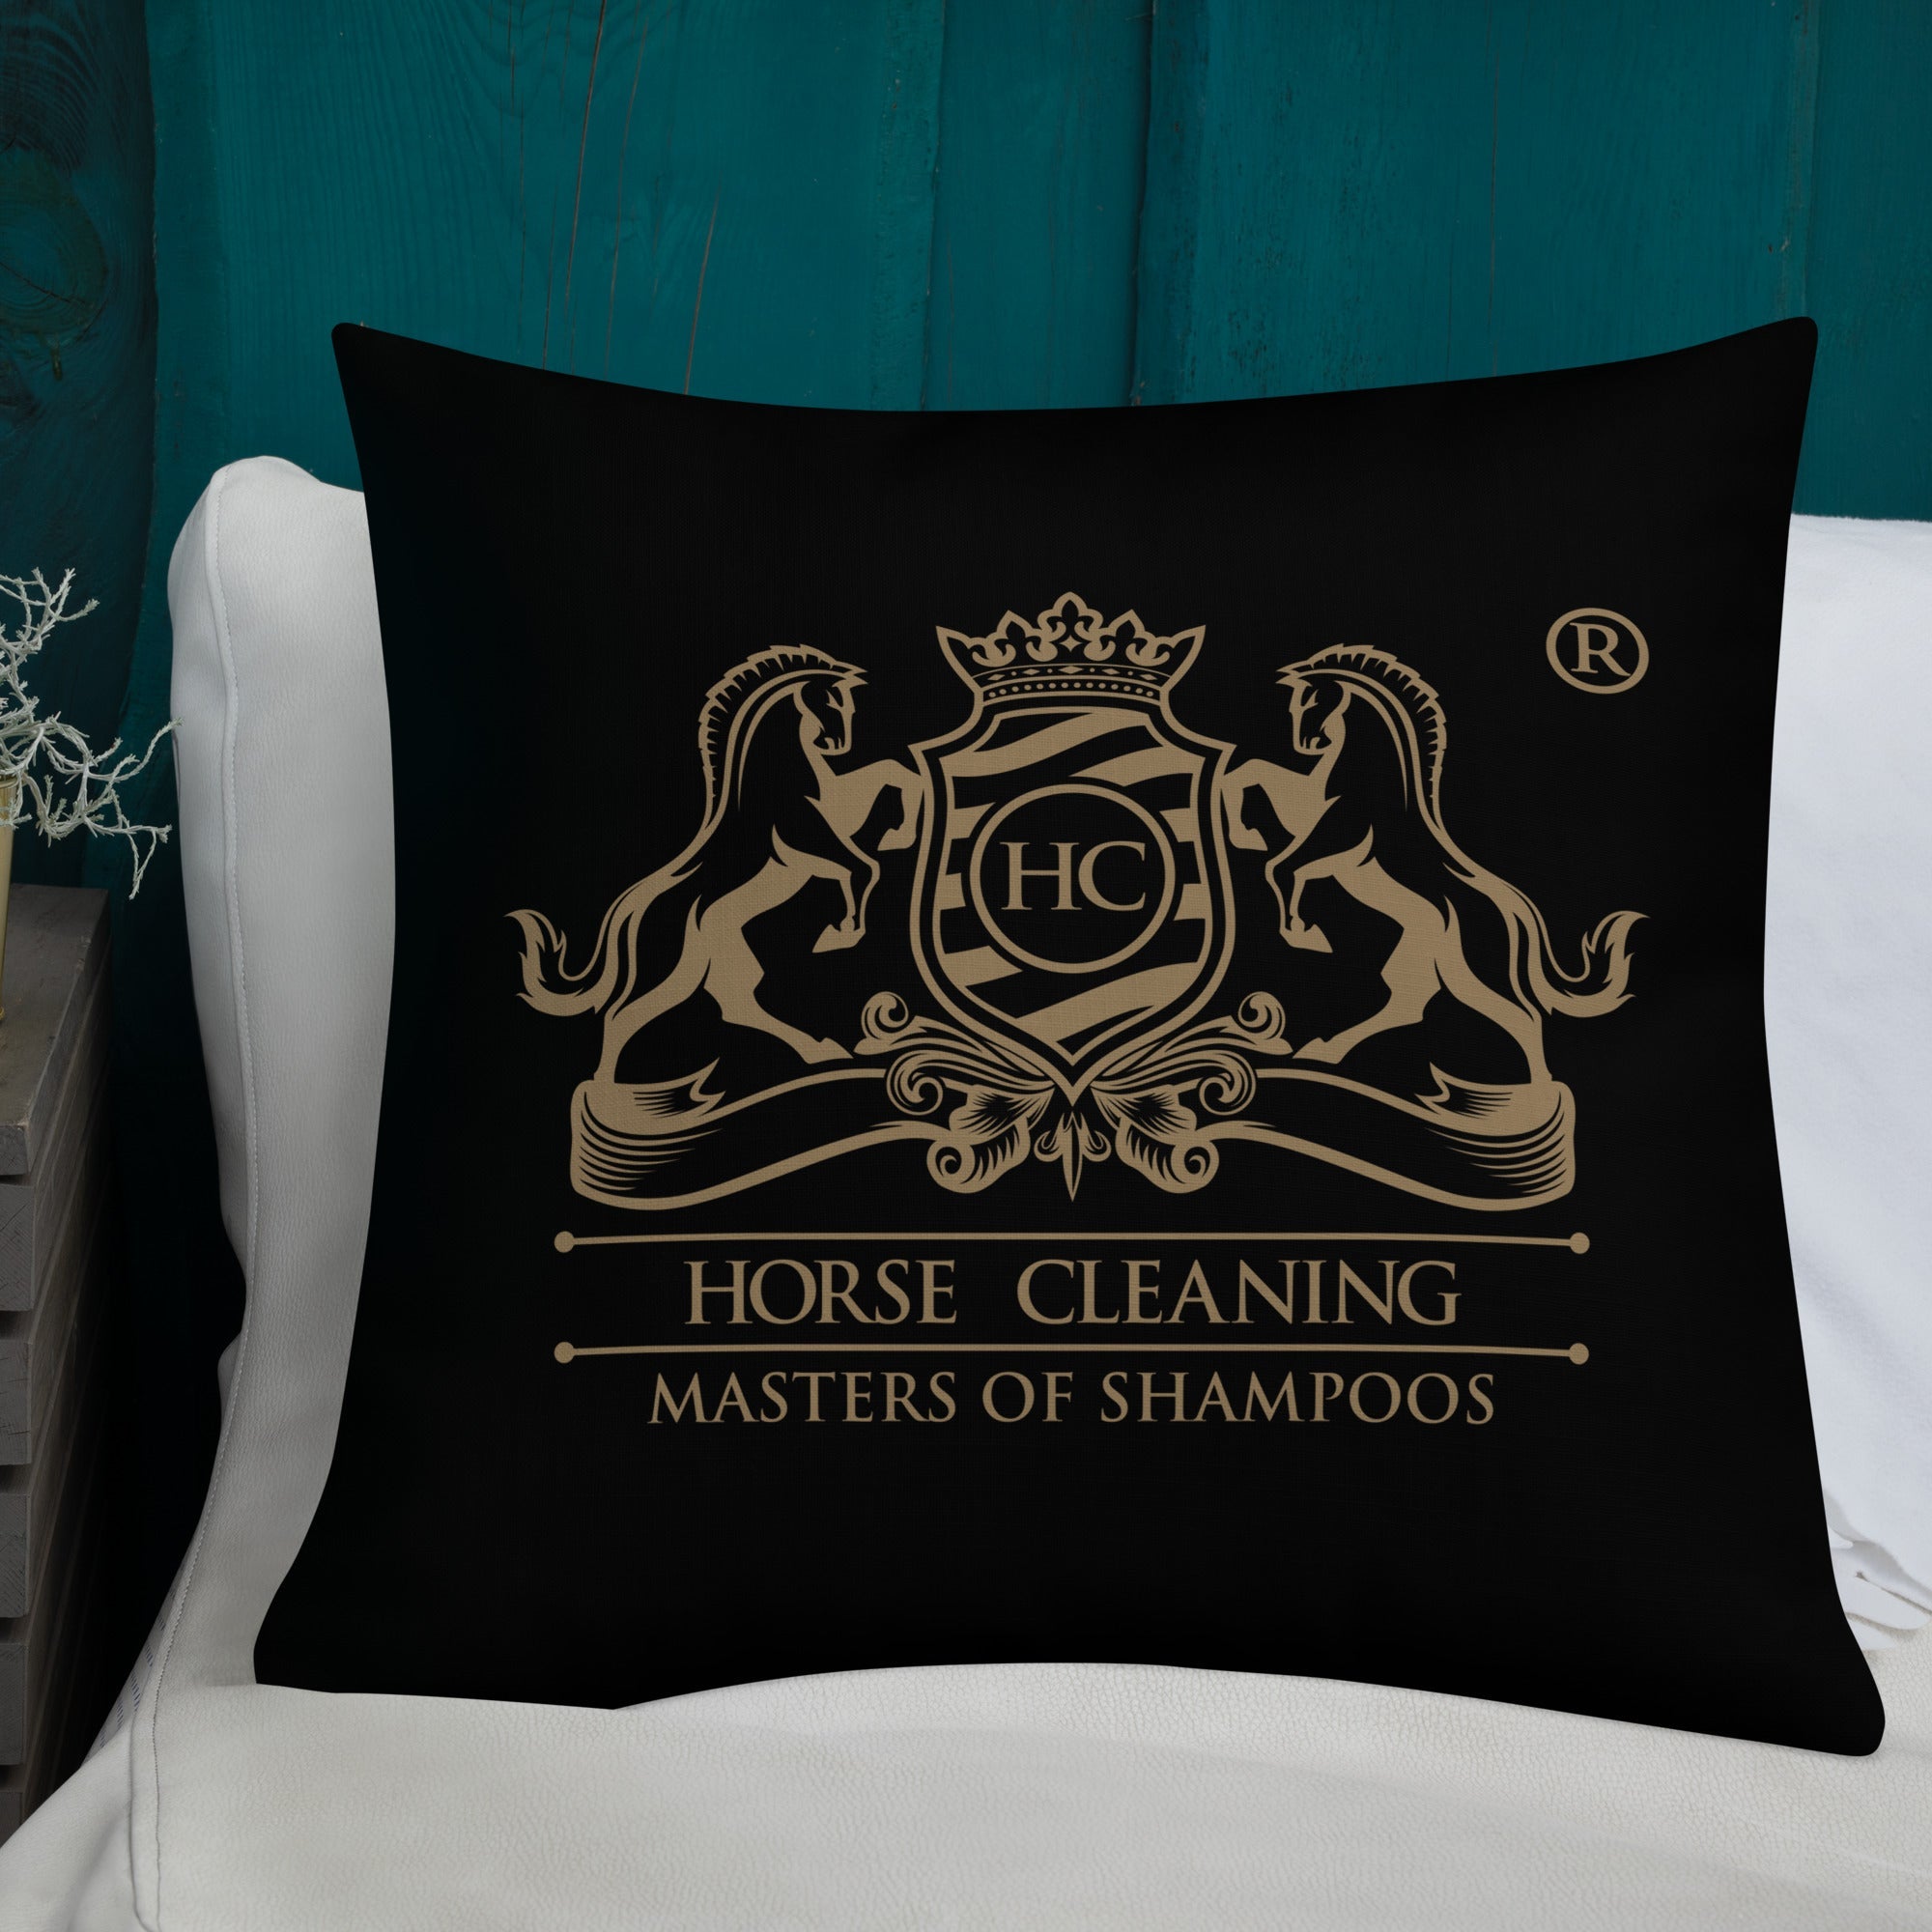 Horse Cleaning Logo Premium Pillow - Horse Cleaning Masters Of Shampoos ™